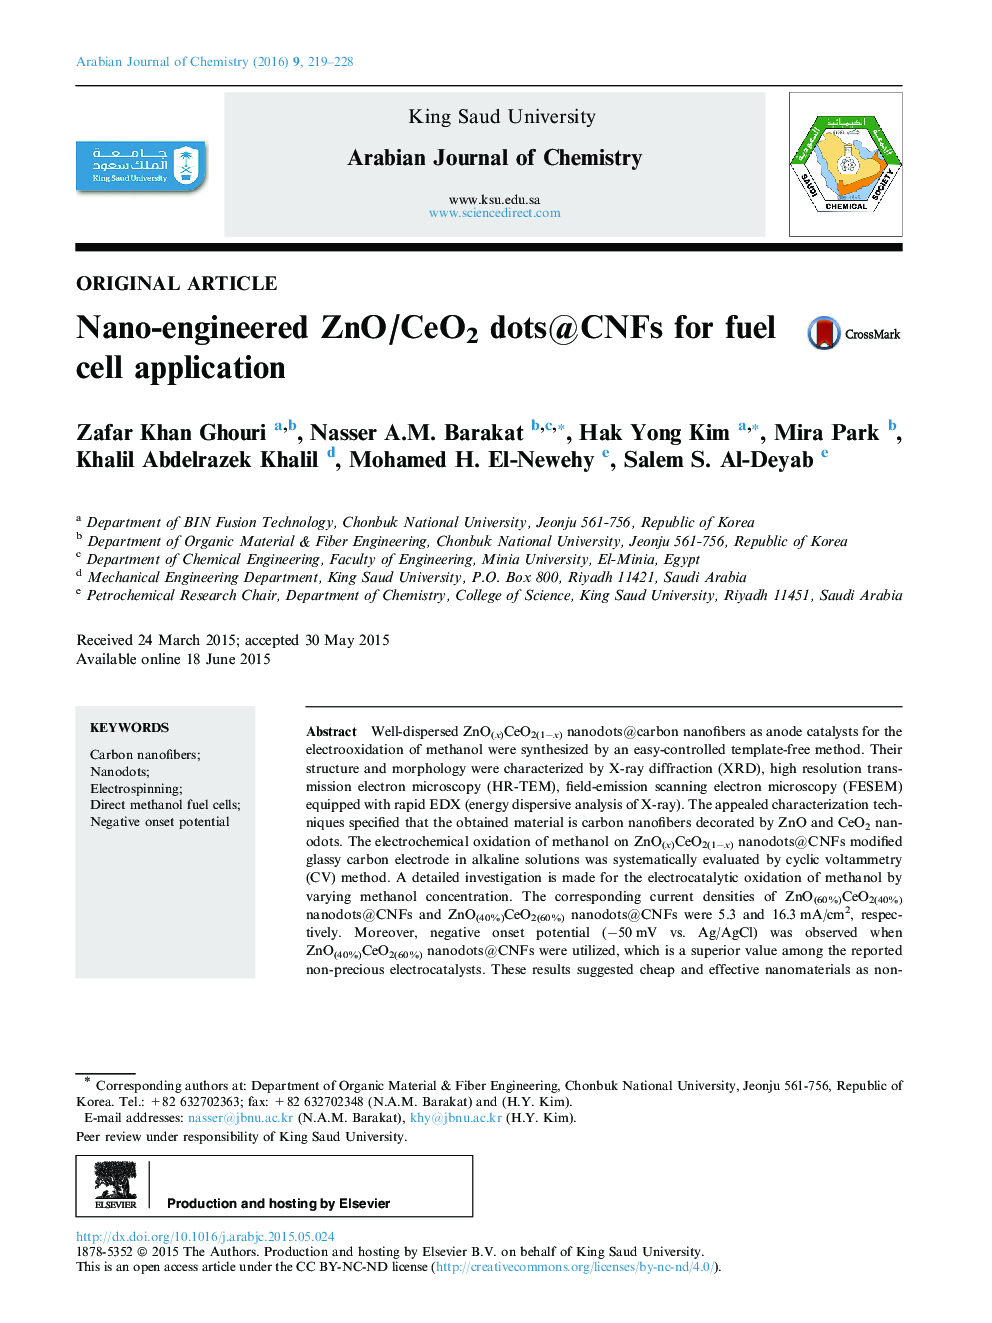 Nano-engineered ZnO/CeO2 dots@CNFs for fuel cell application 